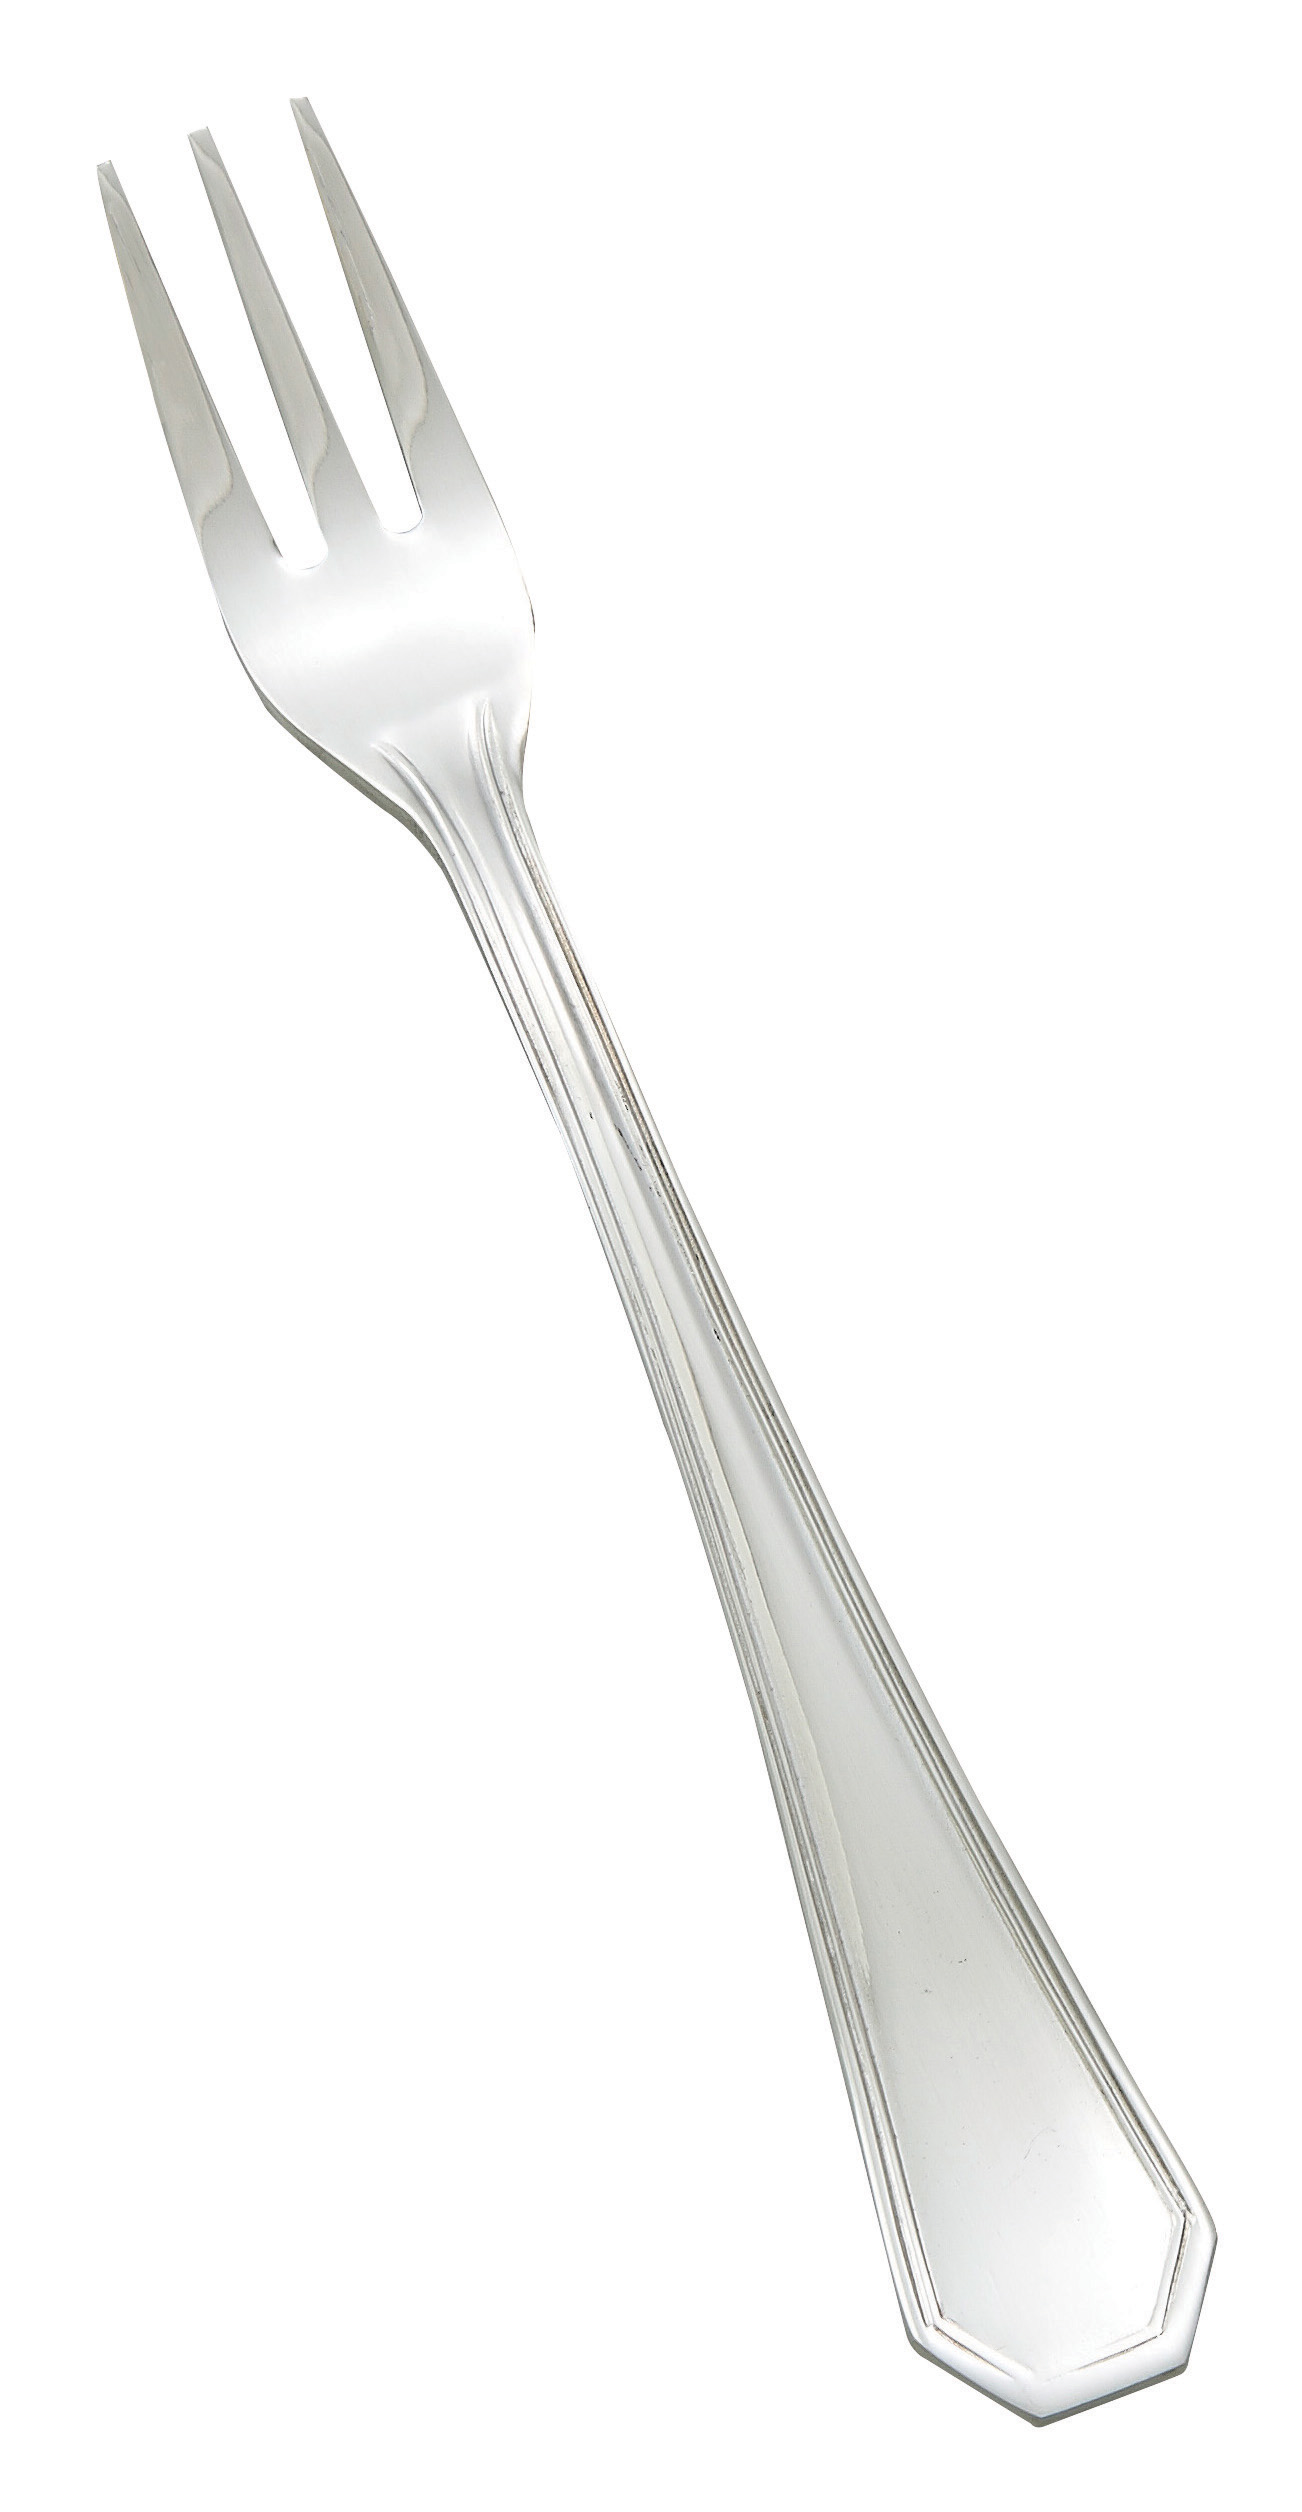 Oyster Fork, 18/8 stainless steel, extra heavy weight,